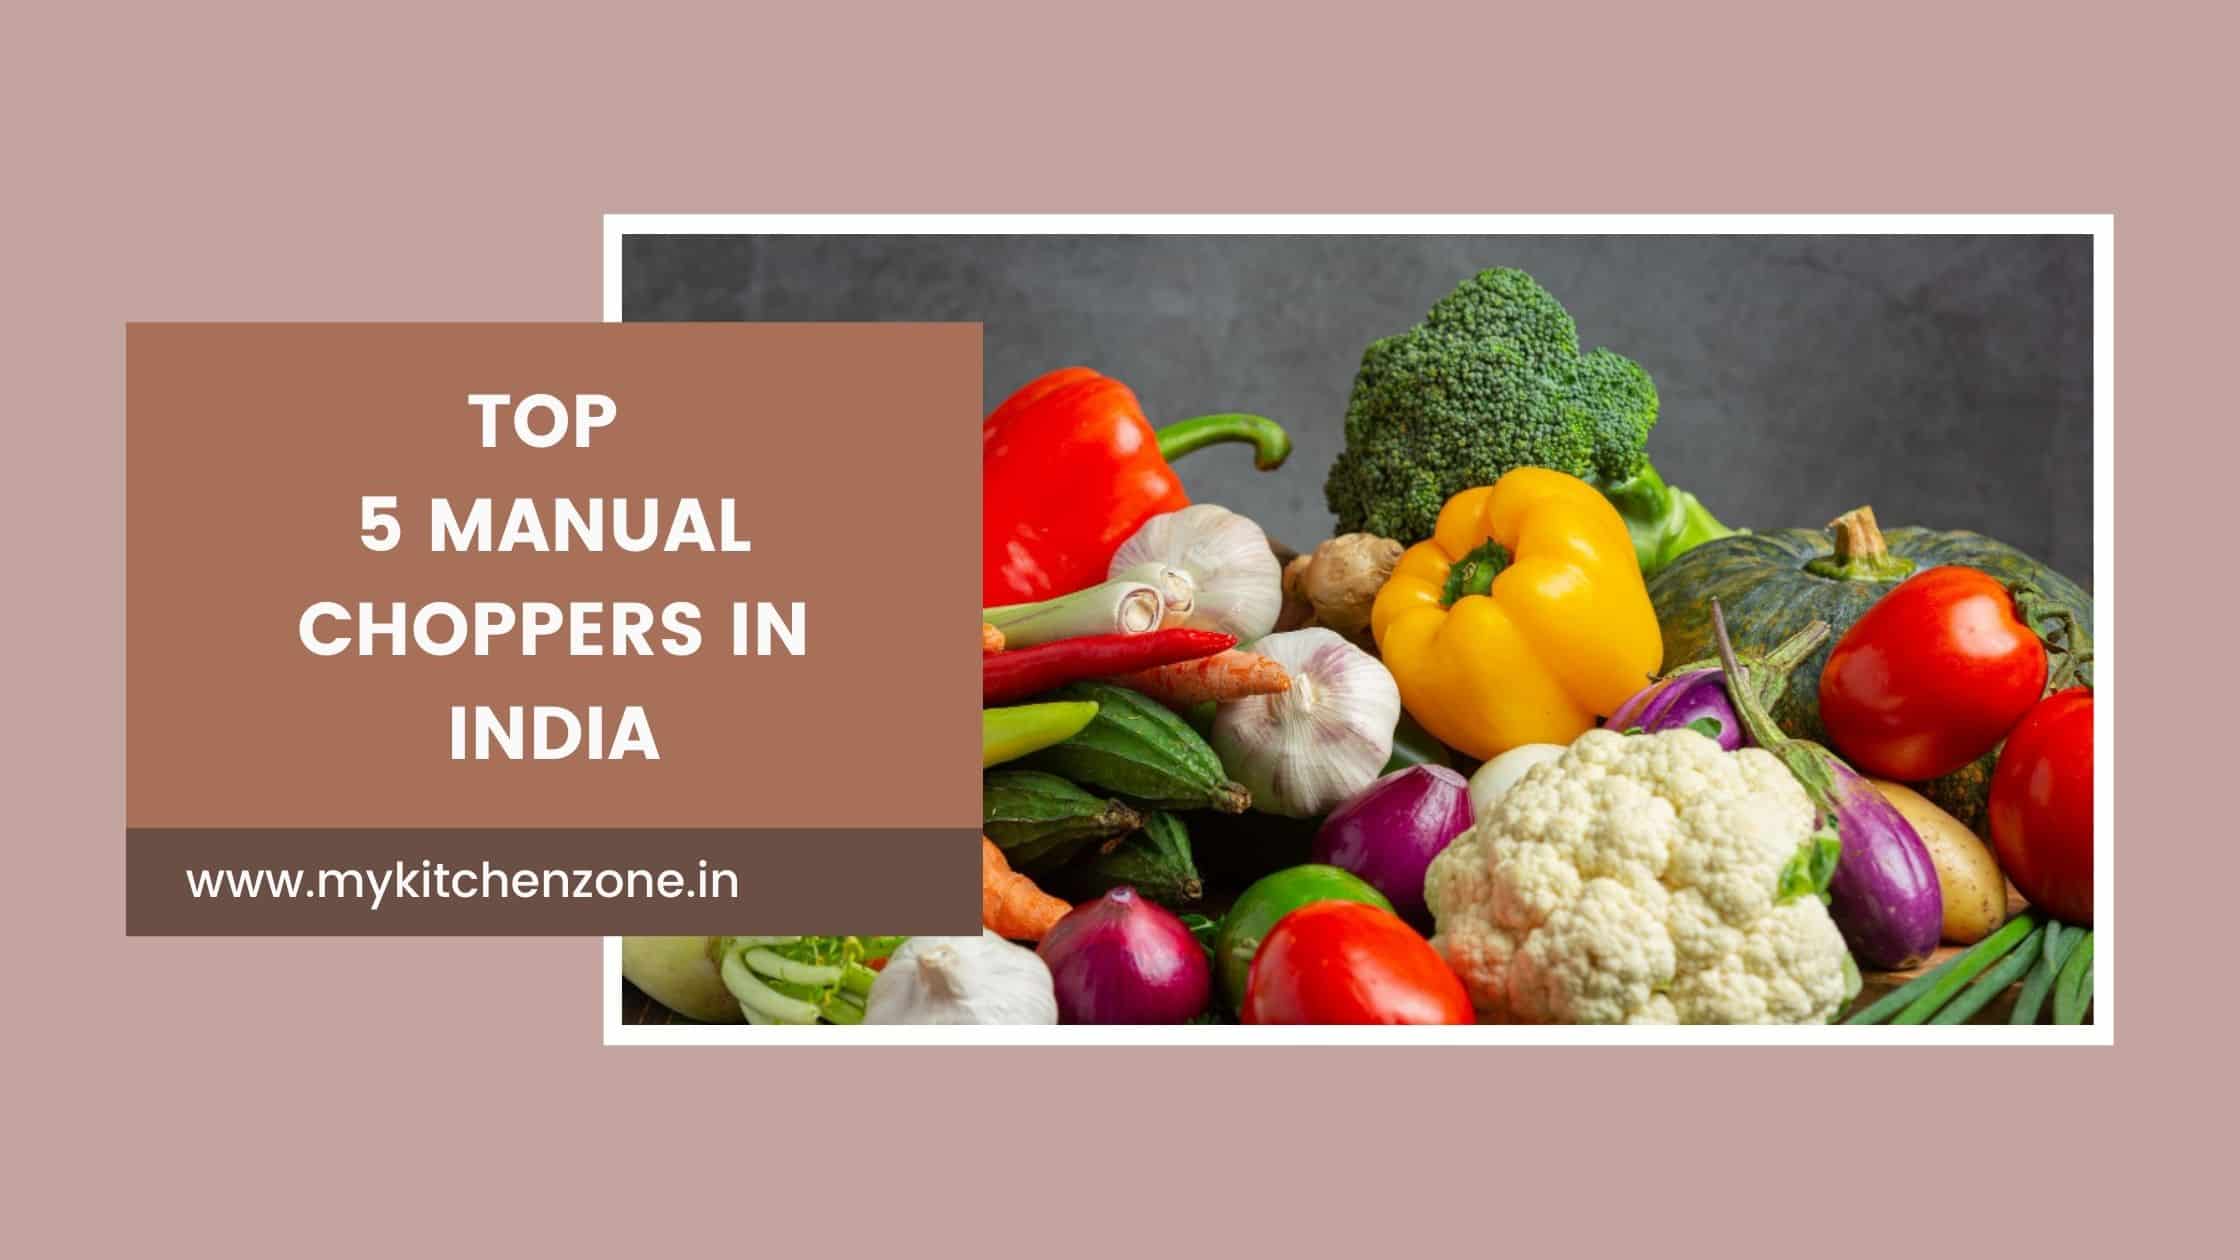 Top 5 manual choppers for chopping vegetables in India